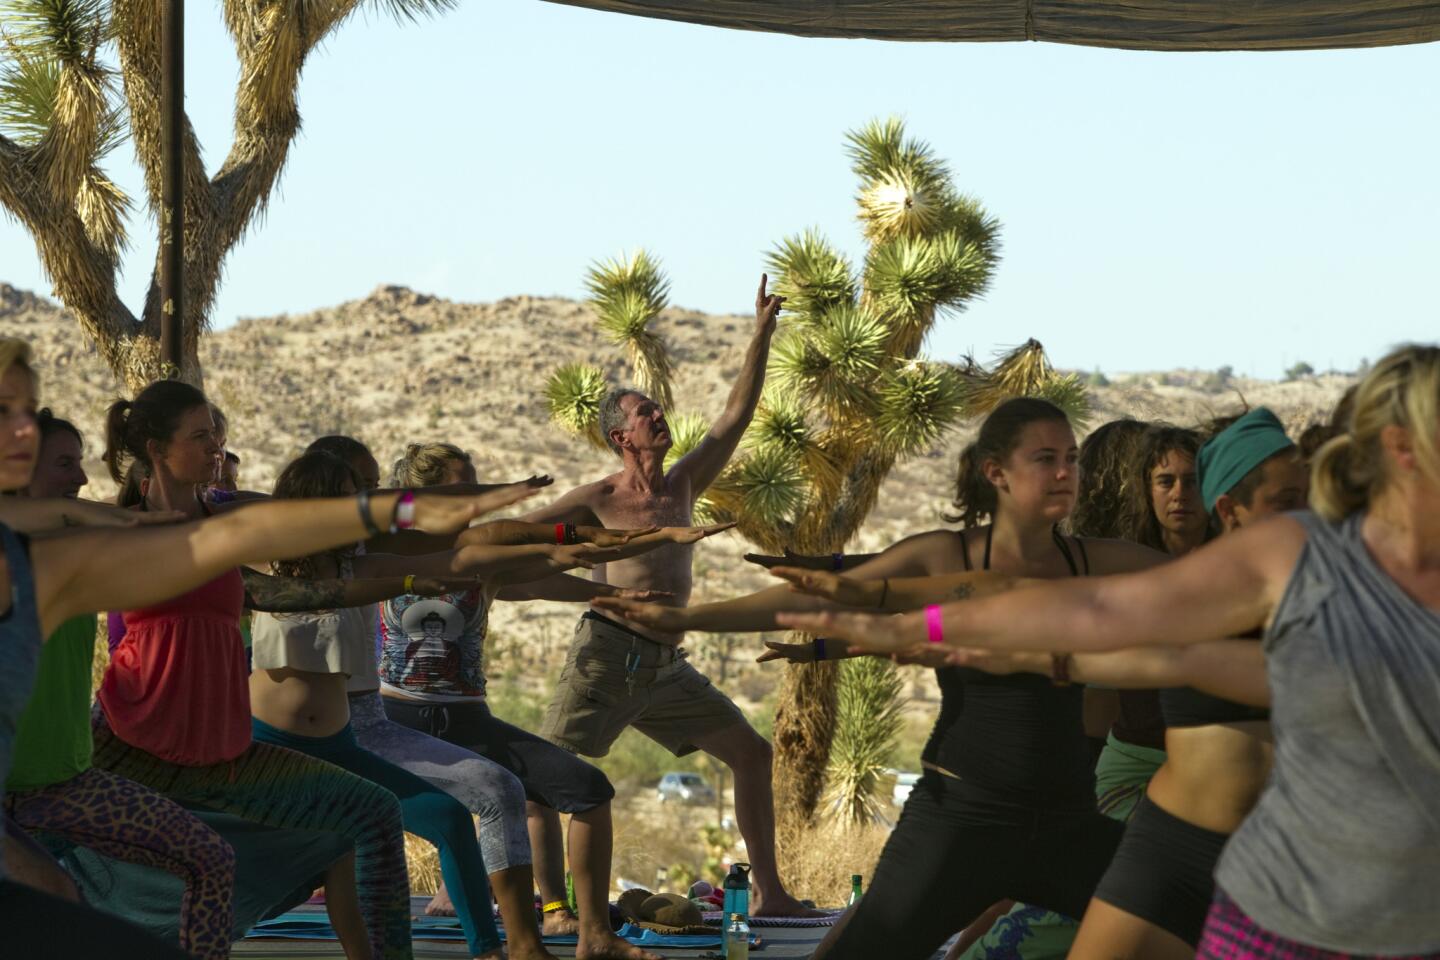 Joshua trees provide a natural backdrop for a yoga workshop at 2014's Bhakti Fest, which was held Sept. 4-7 in Joshua Tree, Calif.